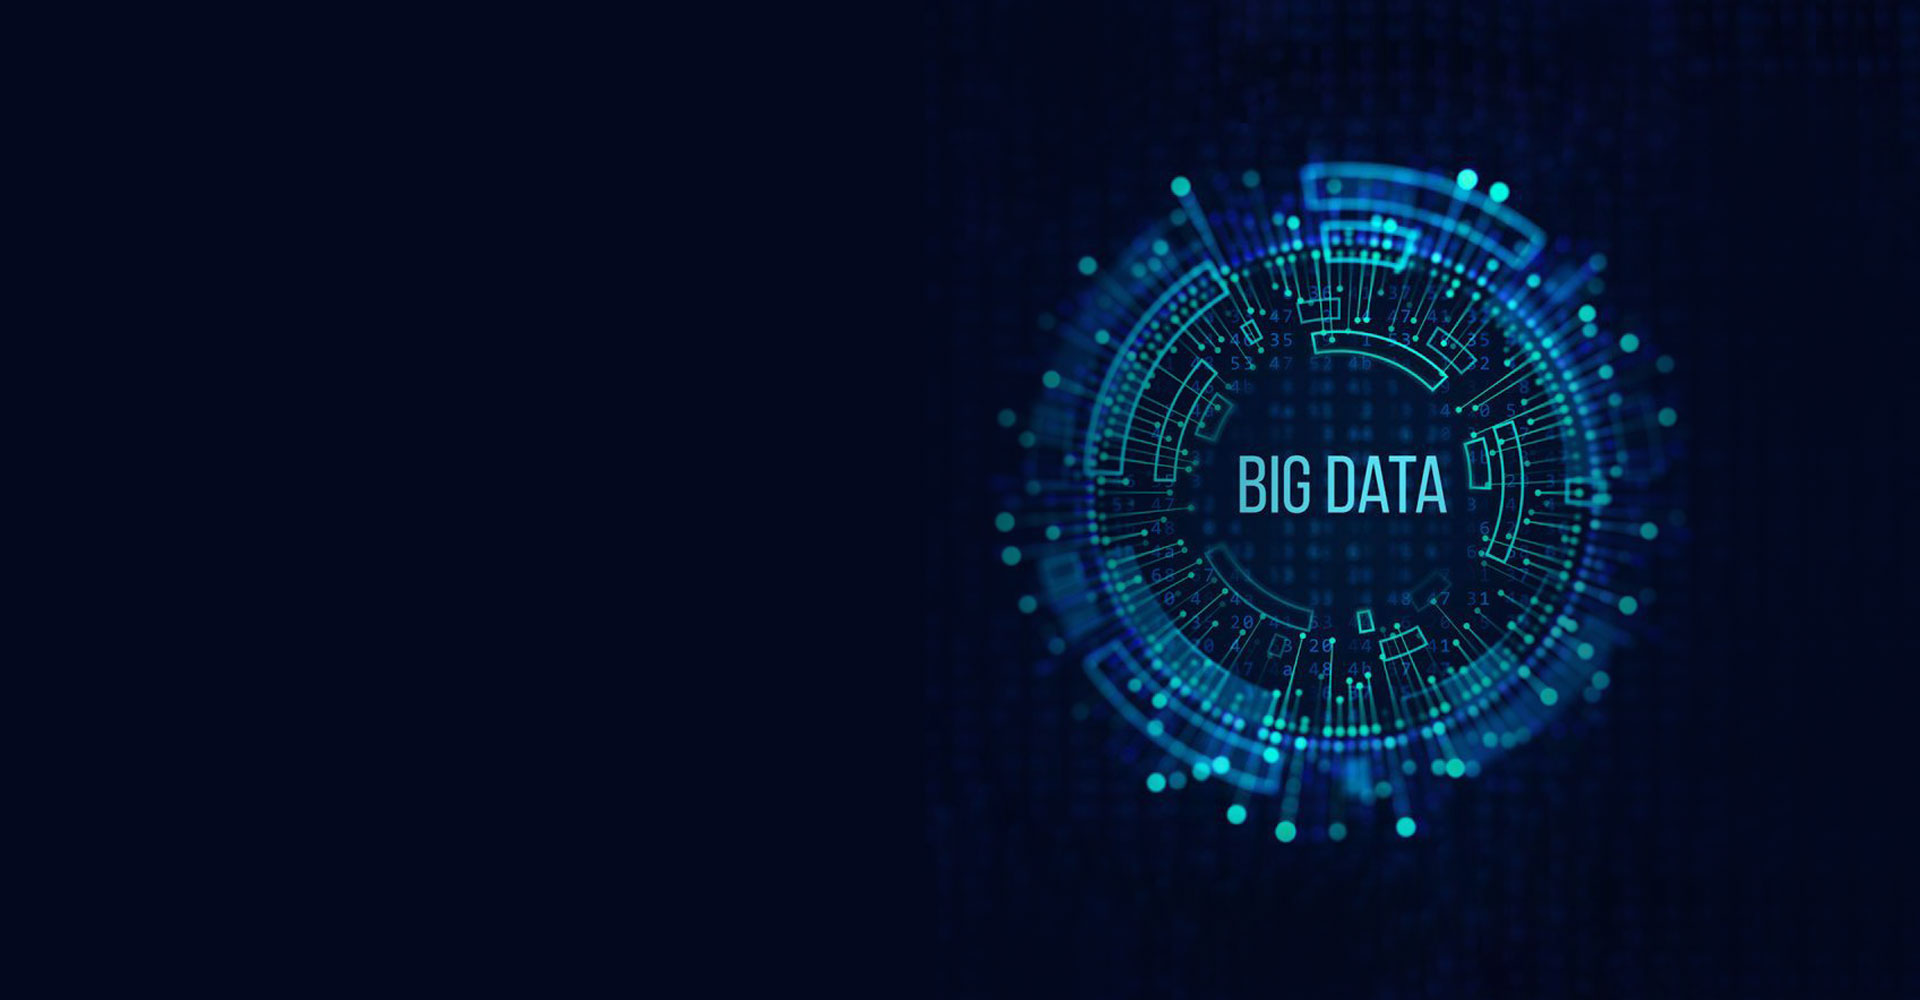 Big Data Analytics in Healthcare: Benefits, Application, Role & Future